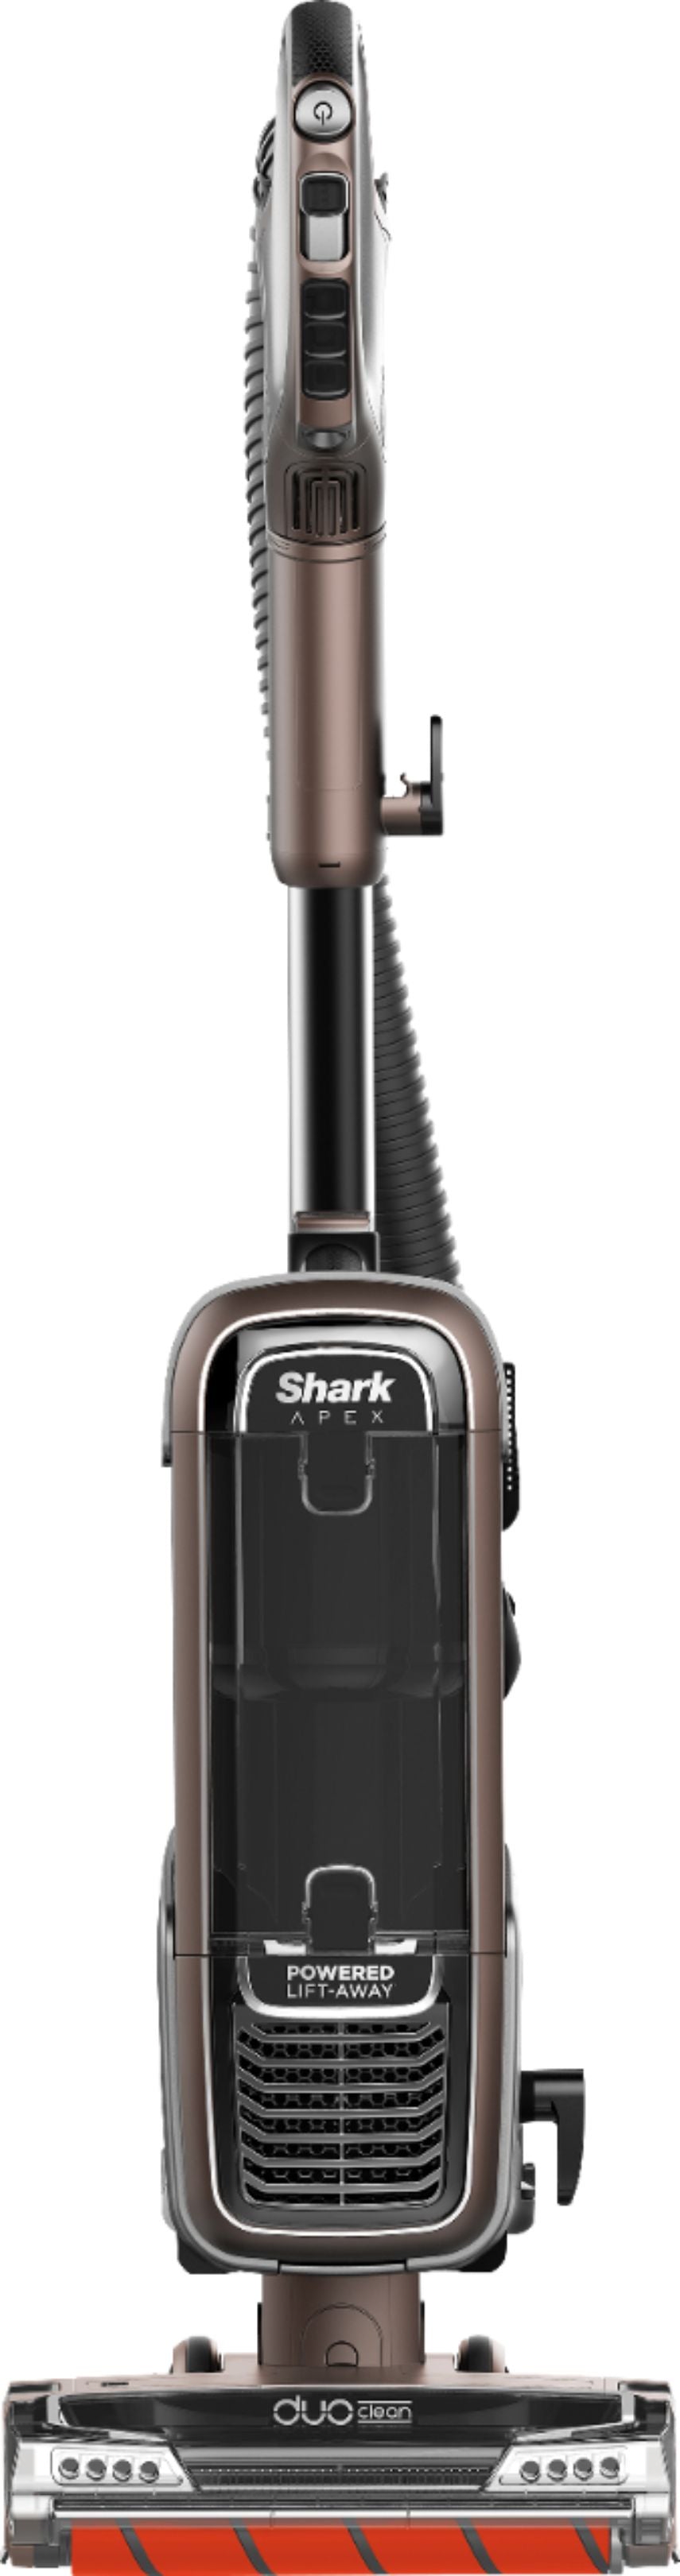 Shark APEX DuoClean with Self-Cleaning Brushroll Powered Lift-Away Upright Vacuum - Espresso_0